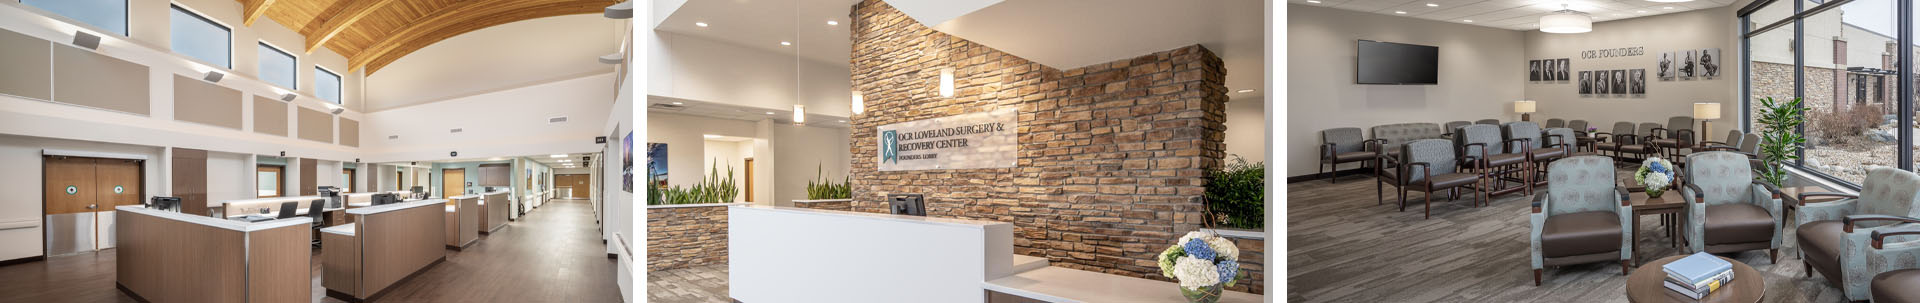 Loveland Surgery & Recovery Center - UCHealth Medical Center of the Rockies